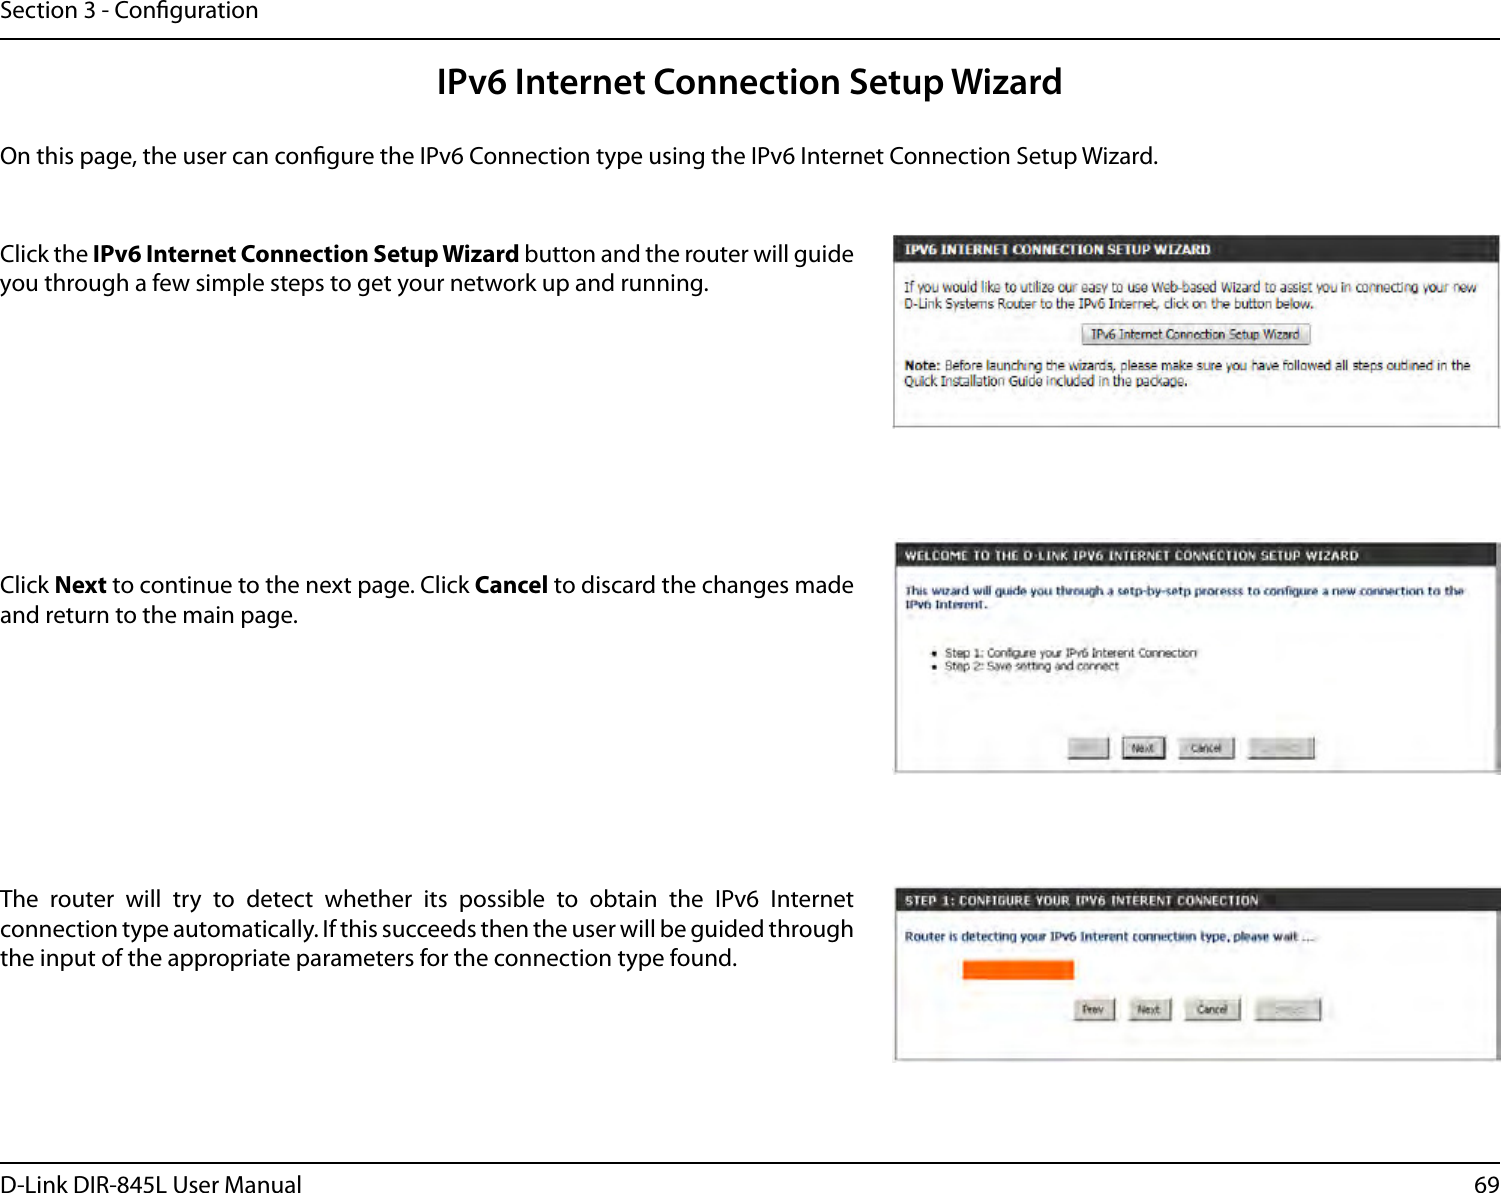 69D-Link DIR-845L User ManualSection 3 - CongurationIPv6 Internet Connection Setup WizardOn this page, the user can congure the IPv6 Connection type using the IPv6 Internet Connection Setup Wizard.Click the IPv6 Internet Connection Setup Wizard button and the router will guide you through a few simple steps to get your network up and running.Click Next to continue to the next page. Click Cancel to discard the changes made and return to the main page.The  router  will  try  to  detect  whether  its  possible  to  obtain  the  IPv6  Internet connection type automatically. If this succeeds then the user will be guided through the input of the appropriate parameters for the connection type found.